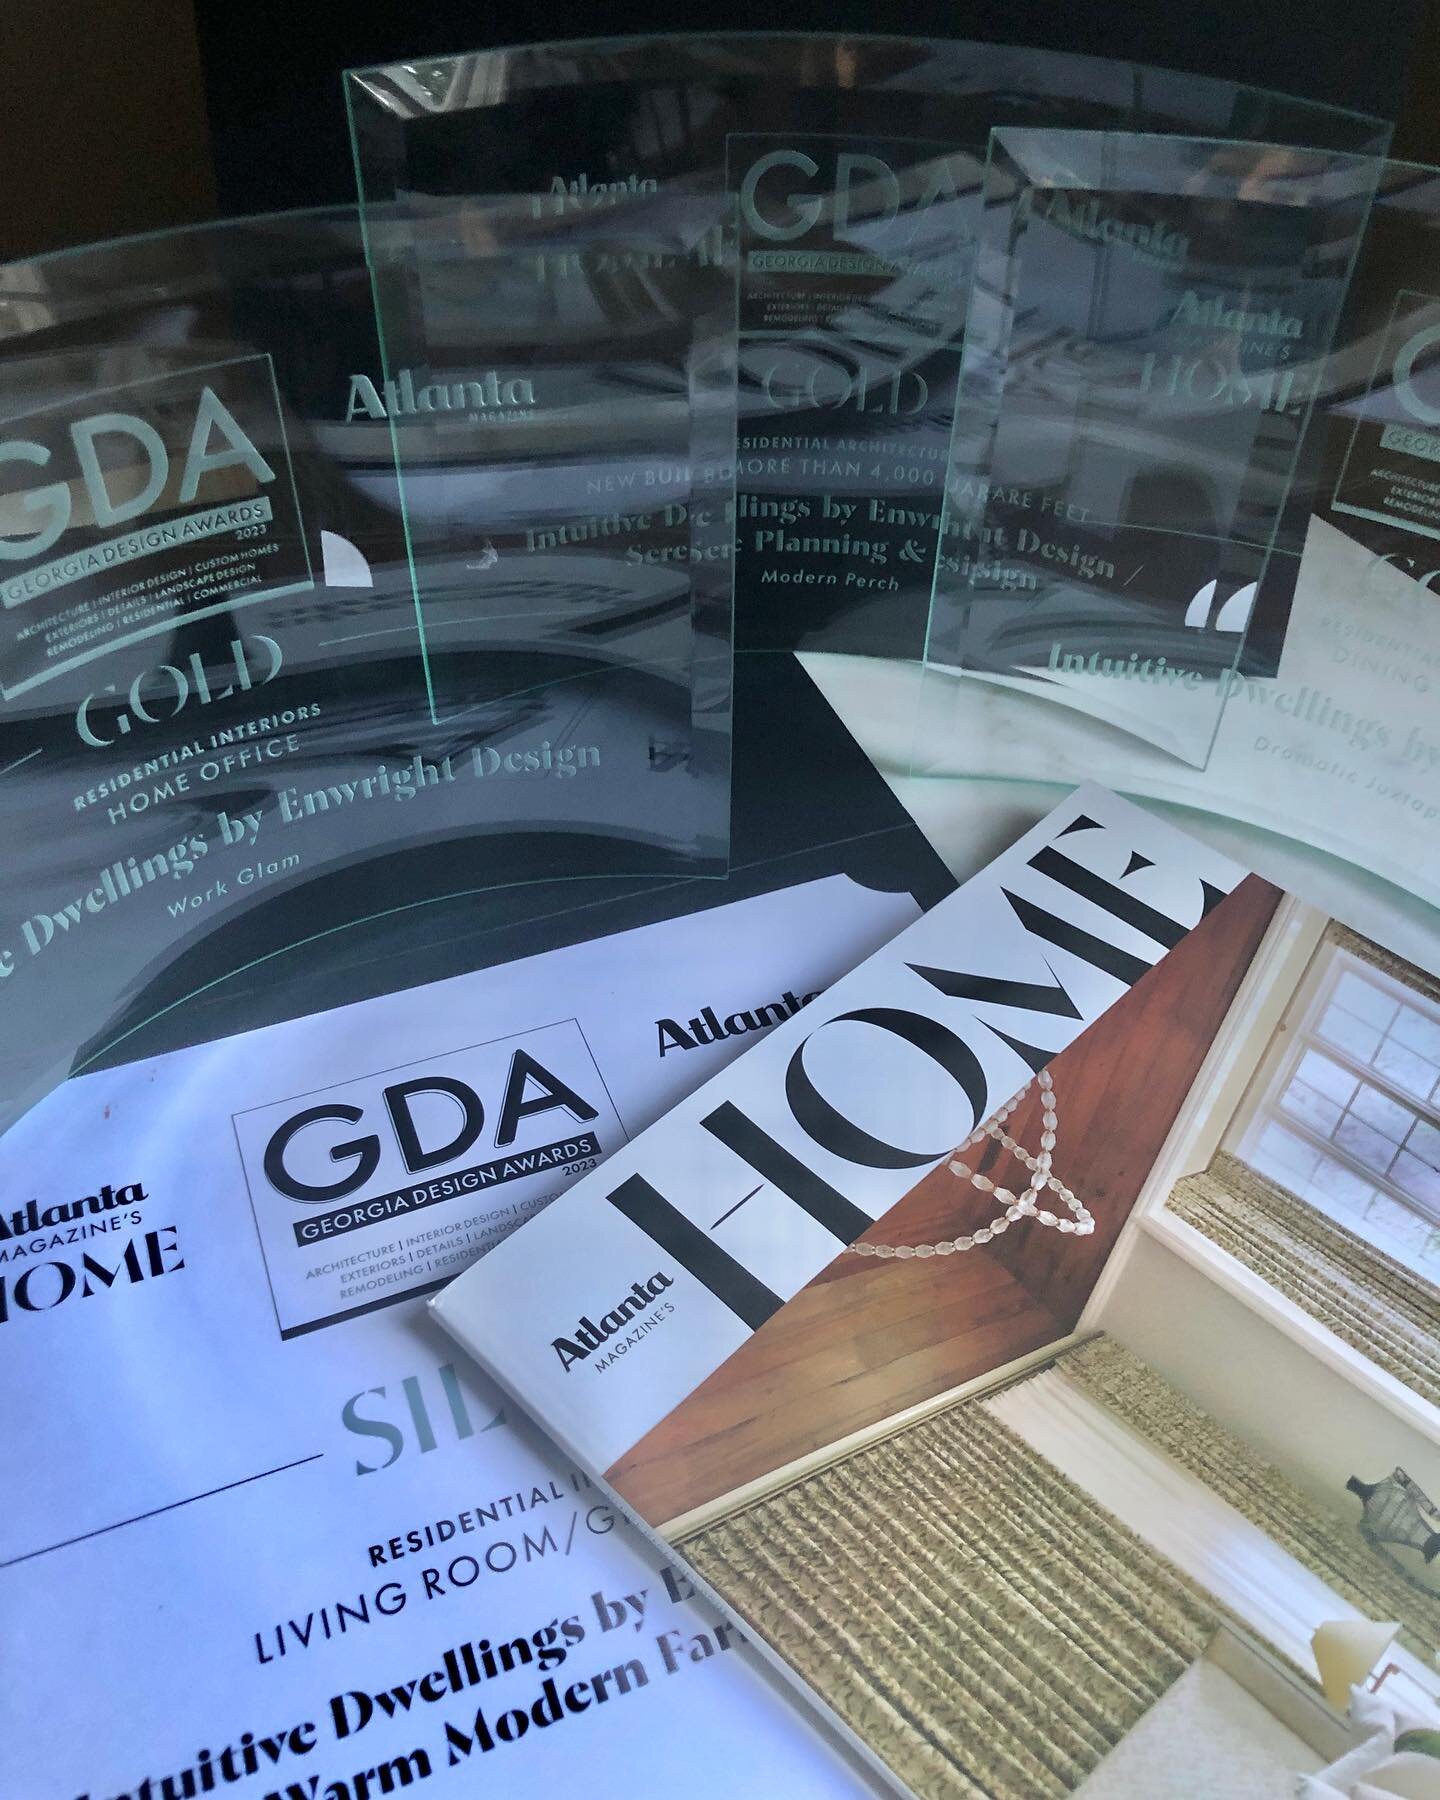 &hellip;in the clouds&hellip;
&hellip;we are still walking on clouds with the honor of receiving (2) Interior Design Gold Awards and a Silver Award, at the 2023 Georgia Design Awards @atlmaghome @atlantamagazine, adding to our architectural Gold Awar